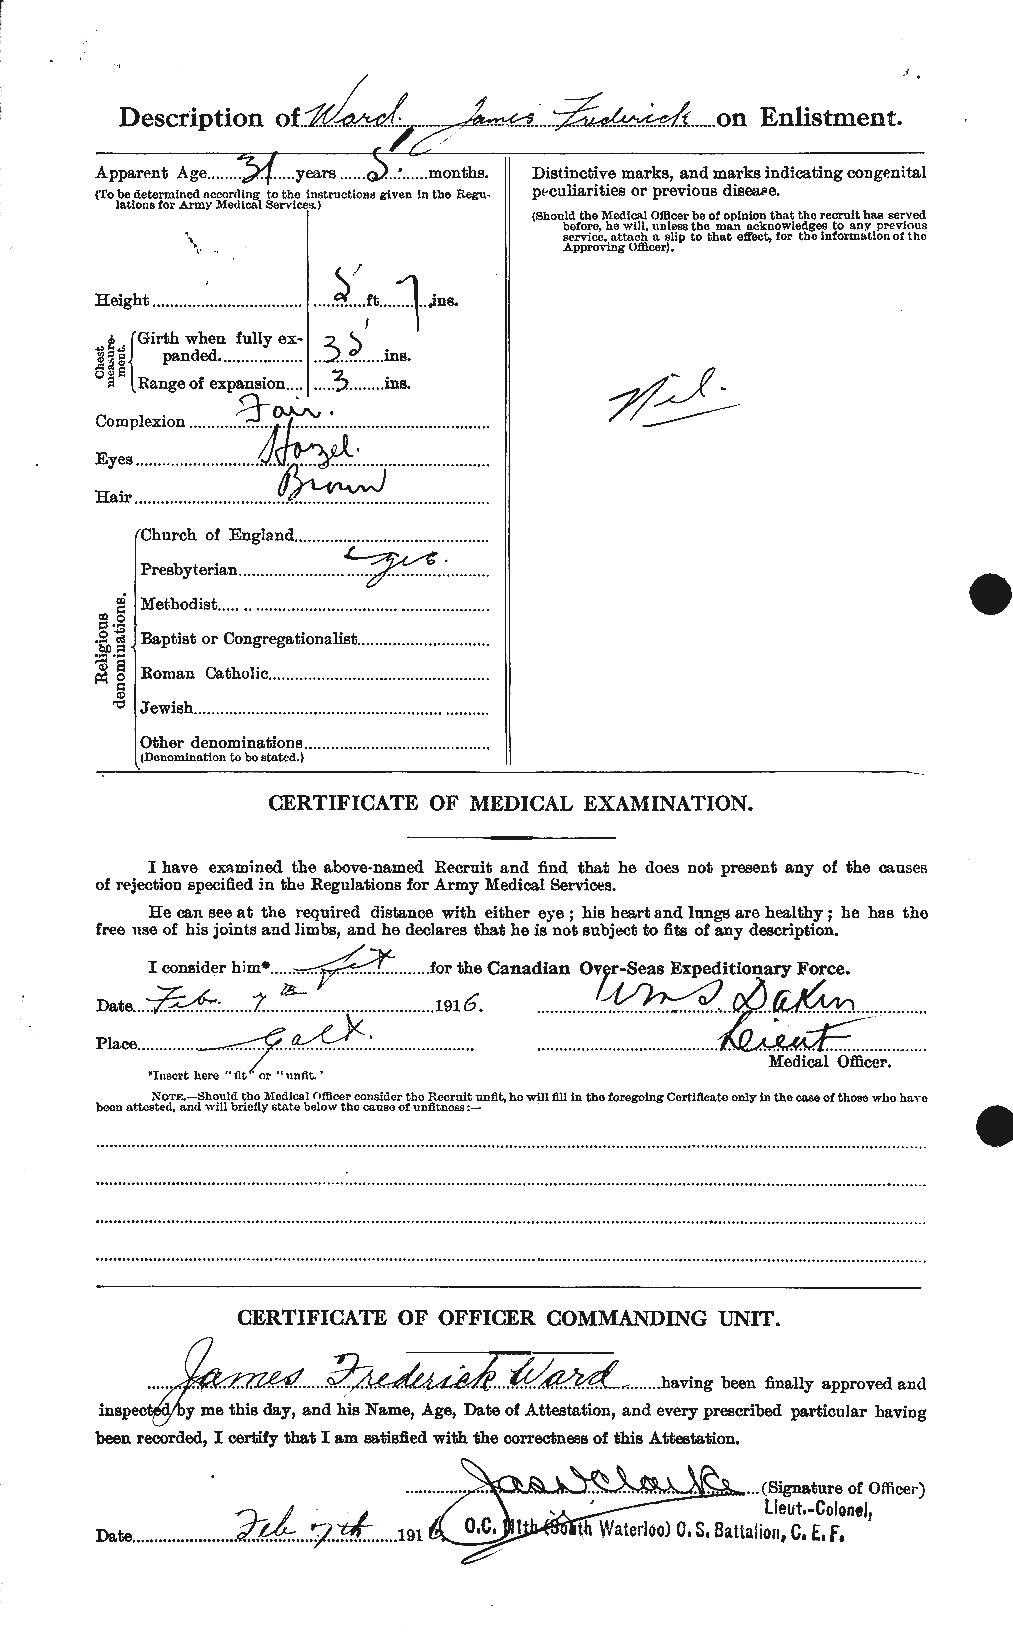 Personnel Records of the First World War - CEF 657905b